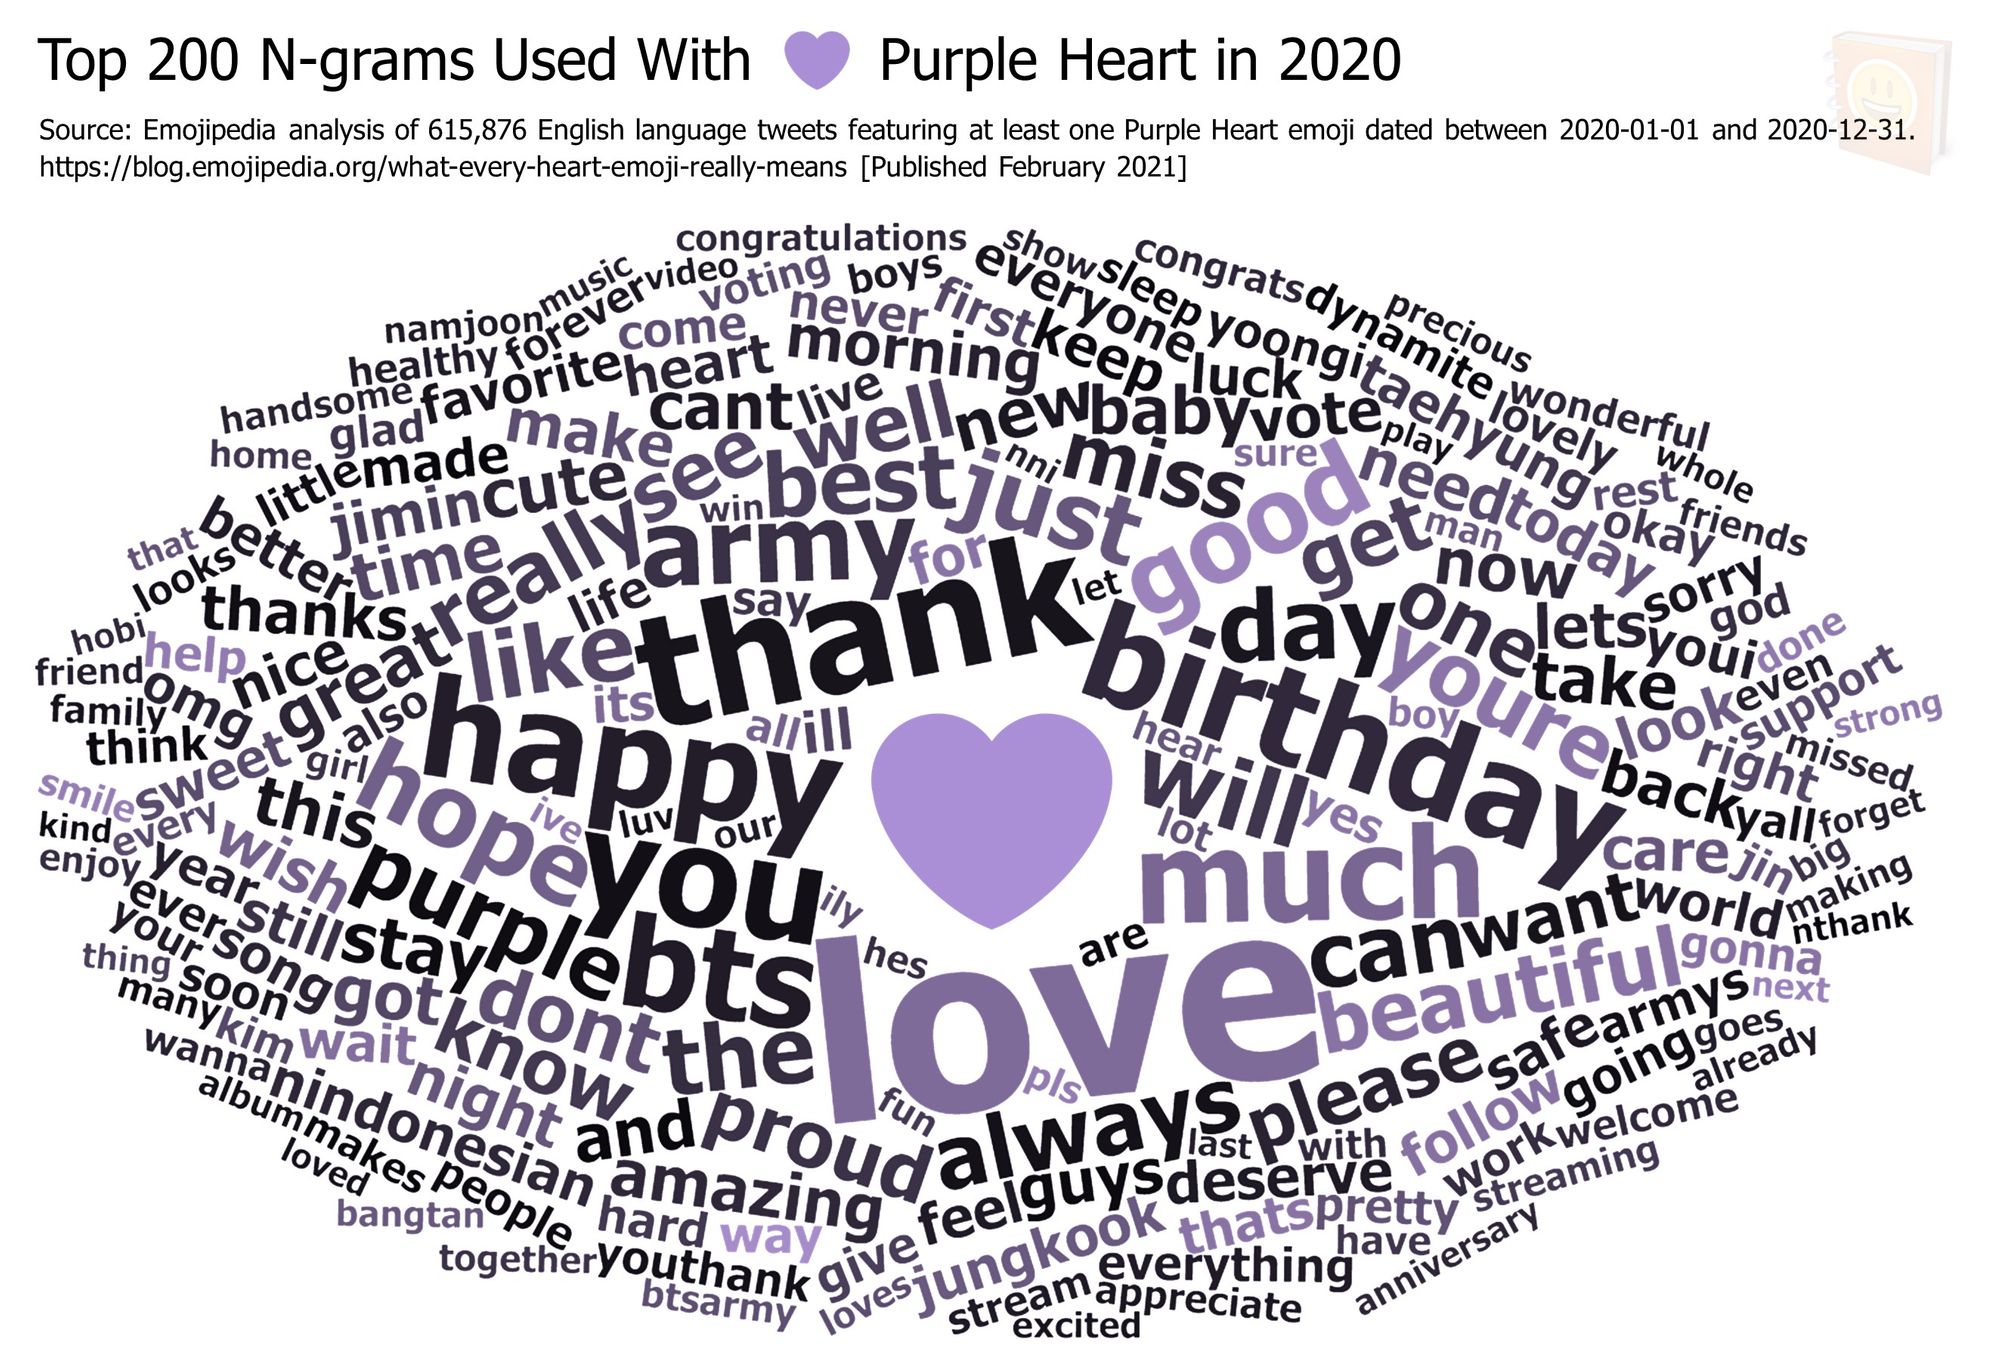 Emojipedia-Blog---What-Every-Heart-Emoji-Really-Means---Top-200-N-grams-Used-With-------Purple-Heart-in-2020